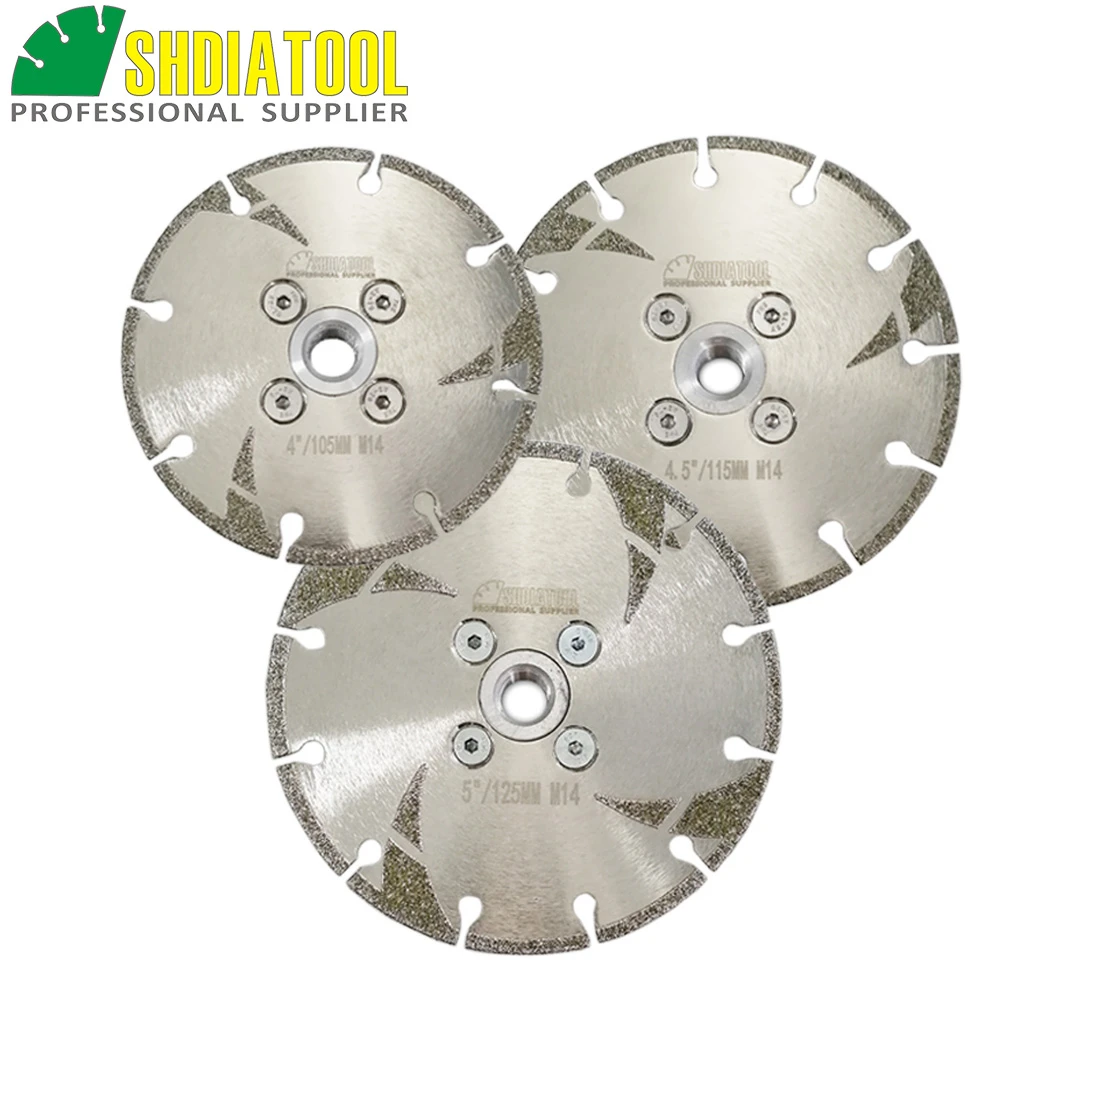 SHDIATOOL 1pc Coated Diamond cutting Wheel Grinding Disc for Marble M14 flange